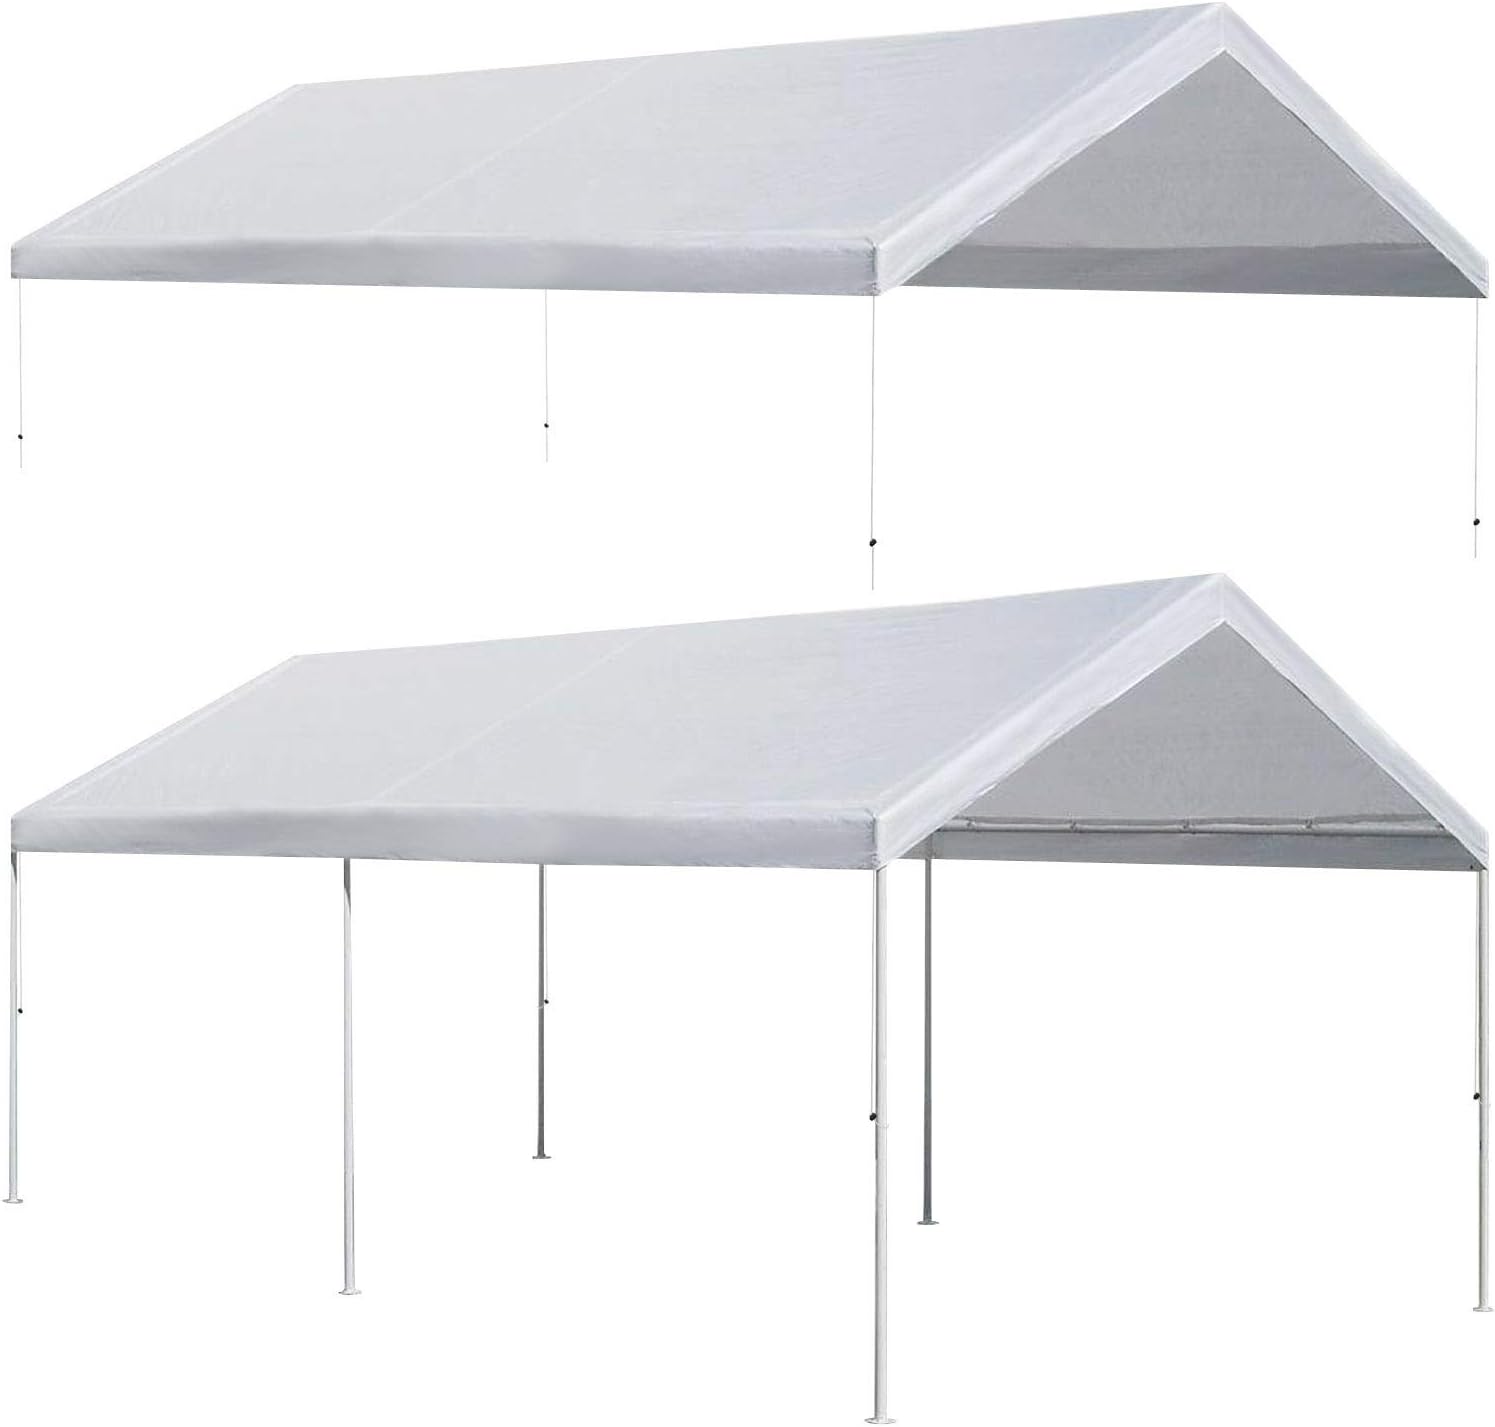 Strong Camel 10'x20' Carport Replacement Canopy Cover for Tent Top Garage Shelter Cover with Cable Ties (Only Cover, Frame is n